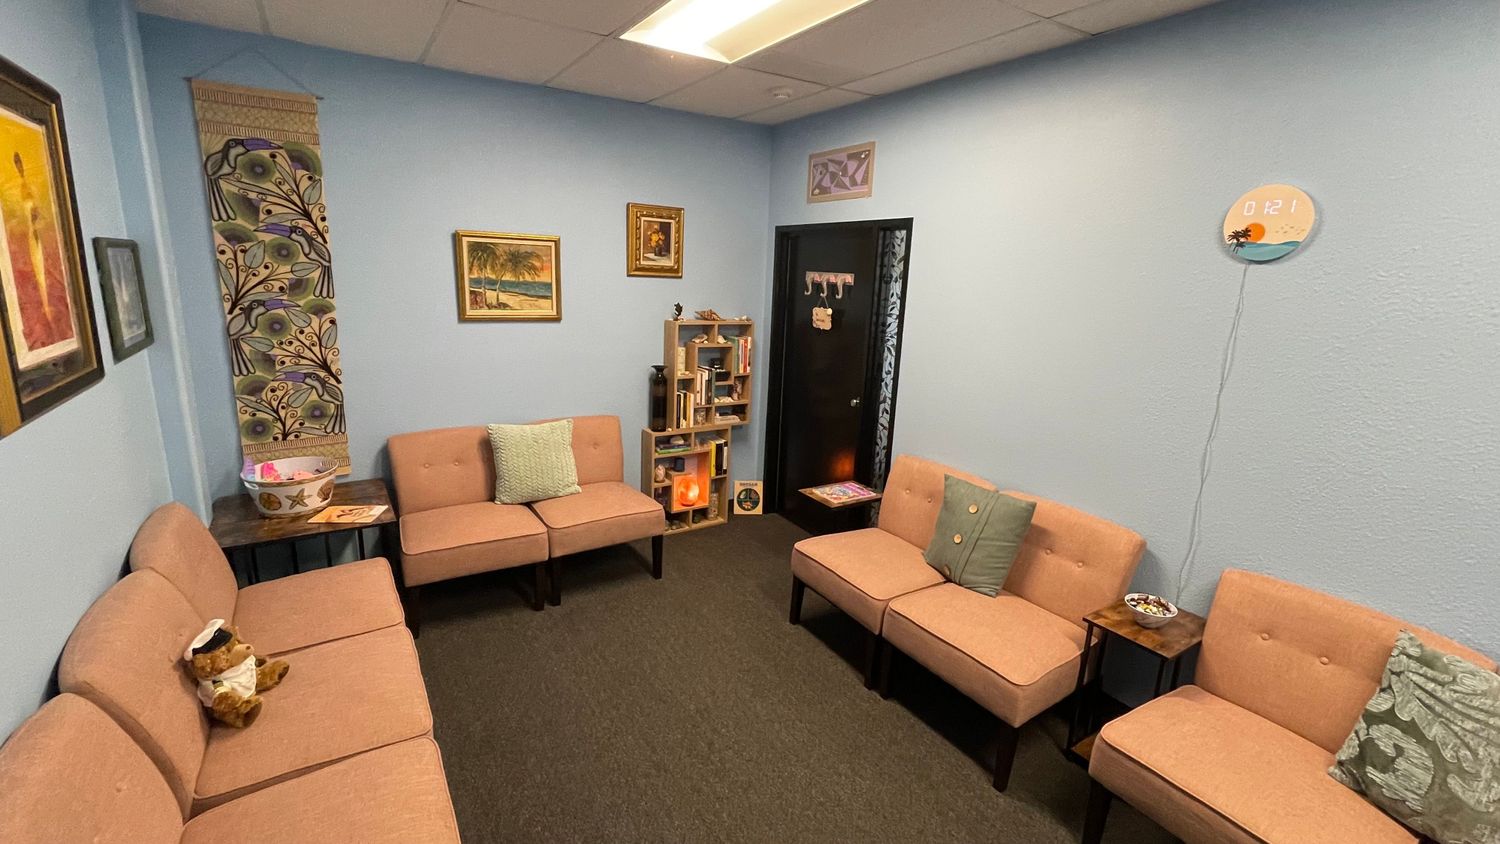 Gallery Photo of Part of the waiting room by day, group room by night.  Art, connection, and magic happens here!  (Tatum location).